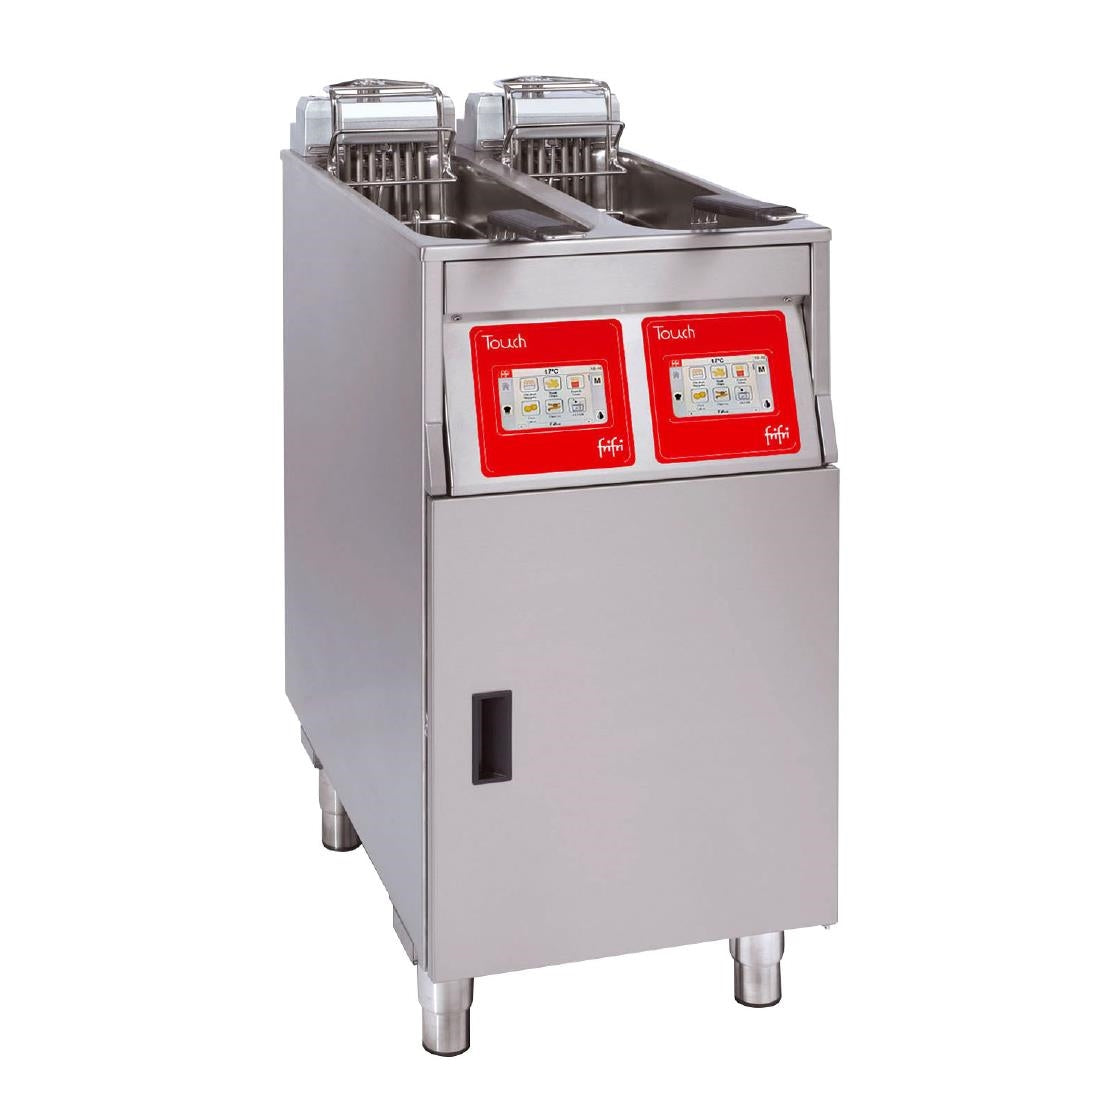 HS011-3PH FriFri Touch 422 Electric Free-Standing Twin Tank Fryer 2 Baskets 2x 7.5kW - Three Phase